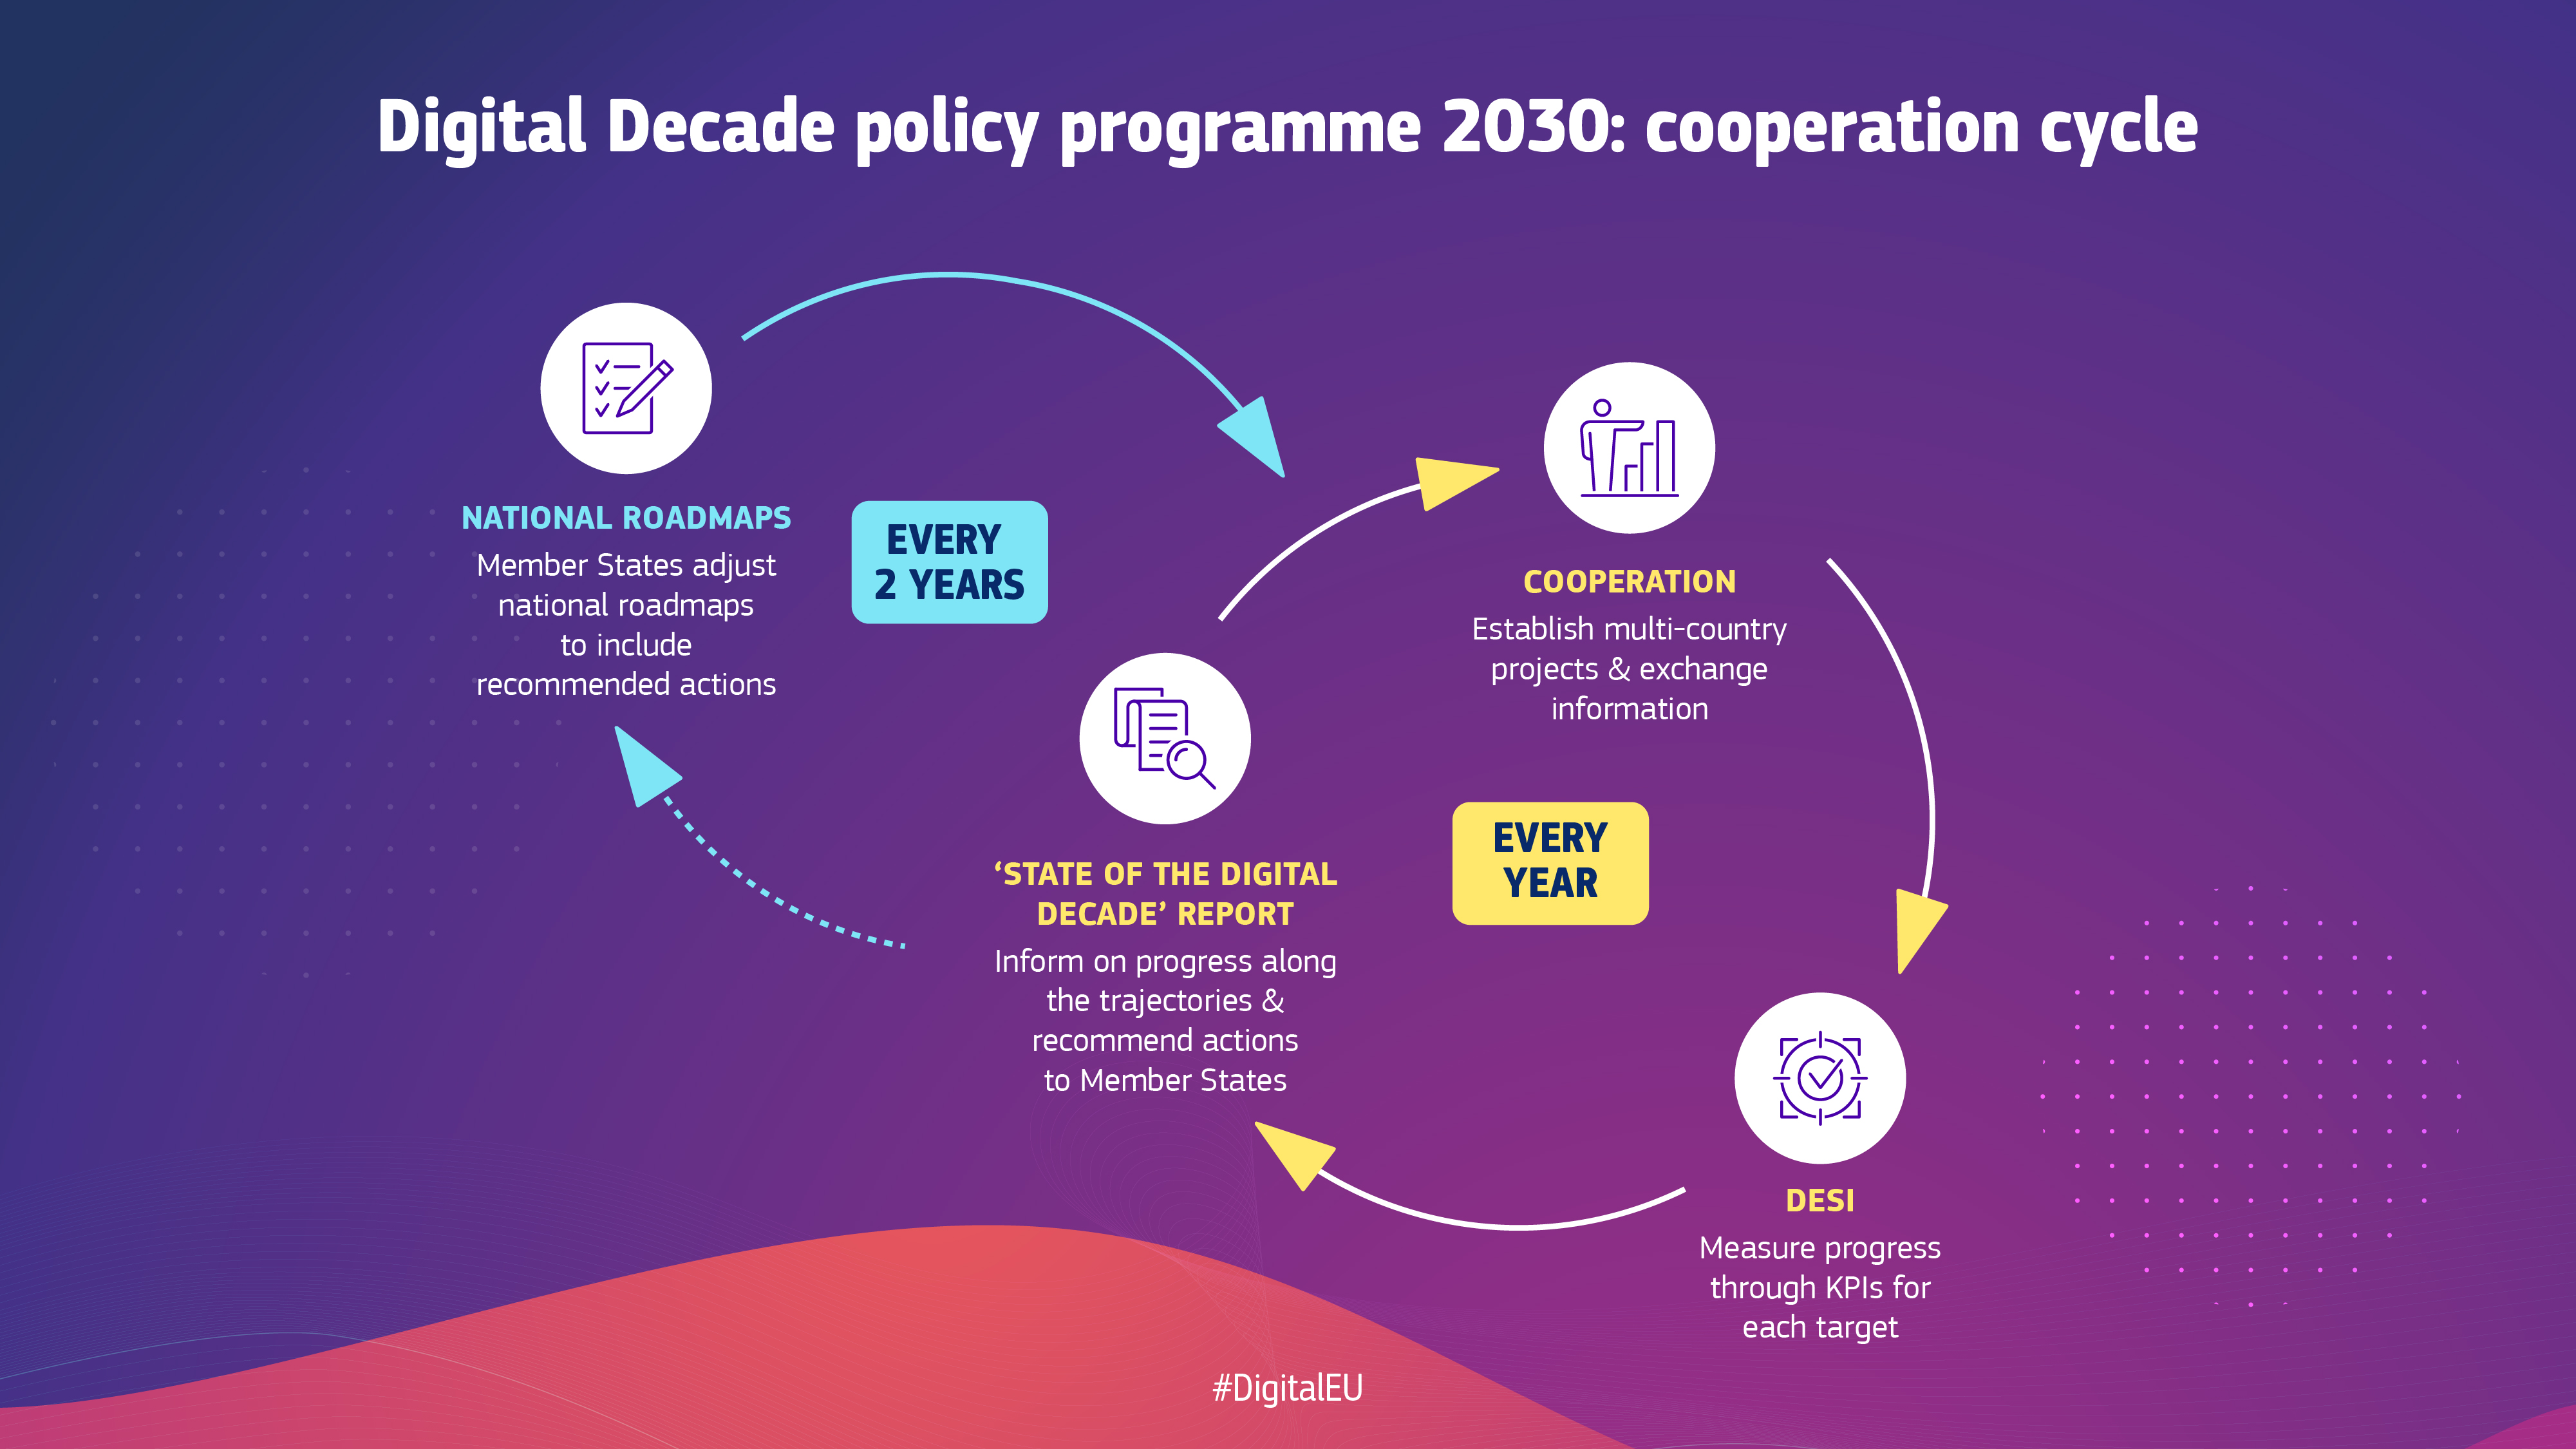 cooperation cycle of the policy programme